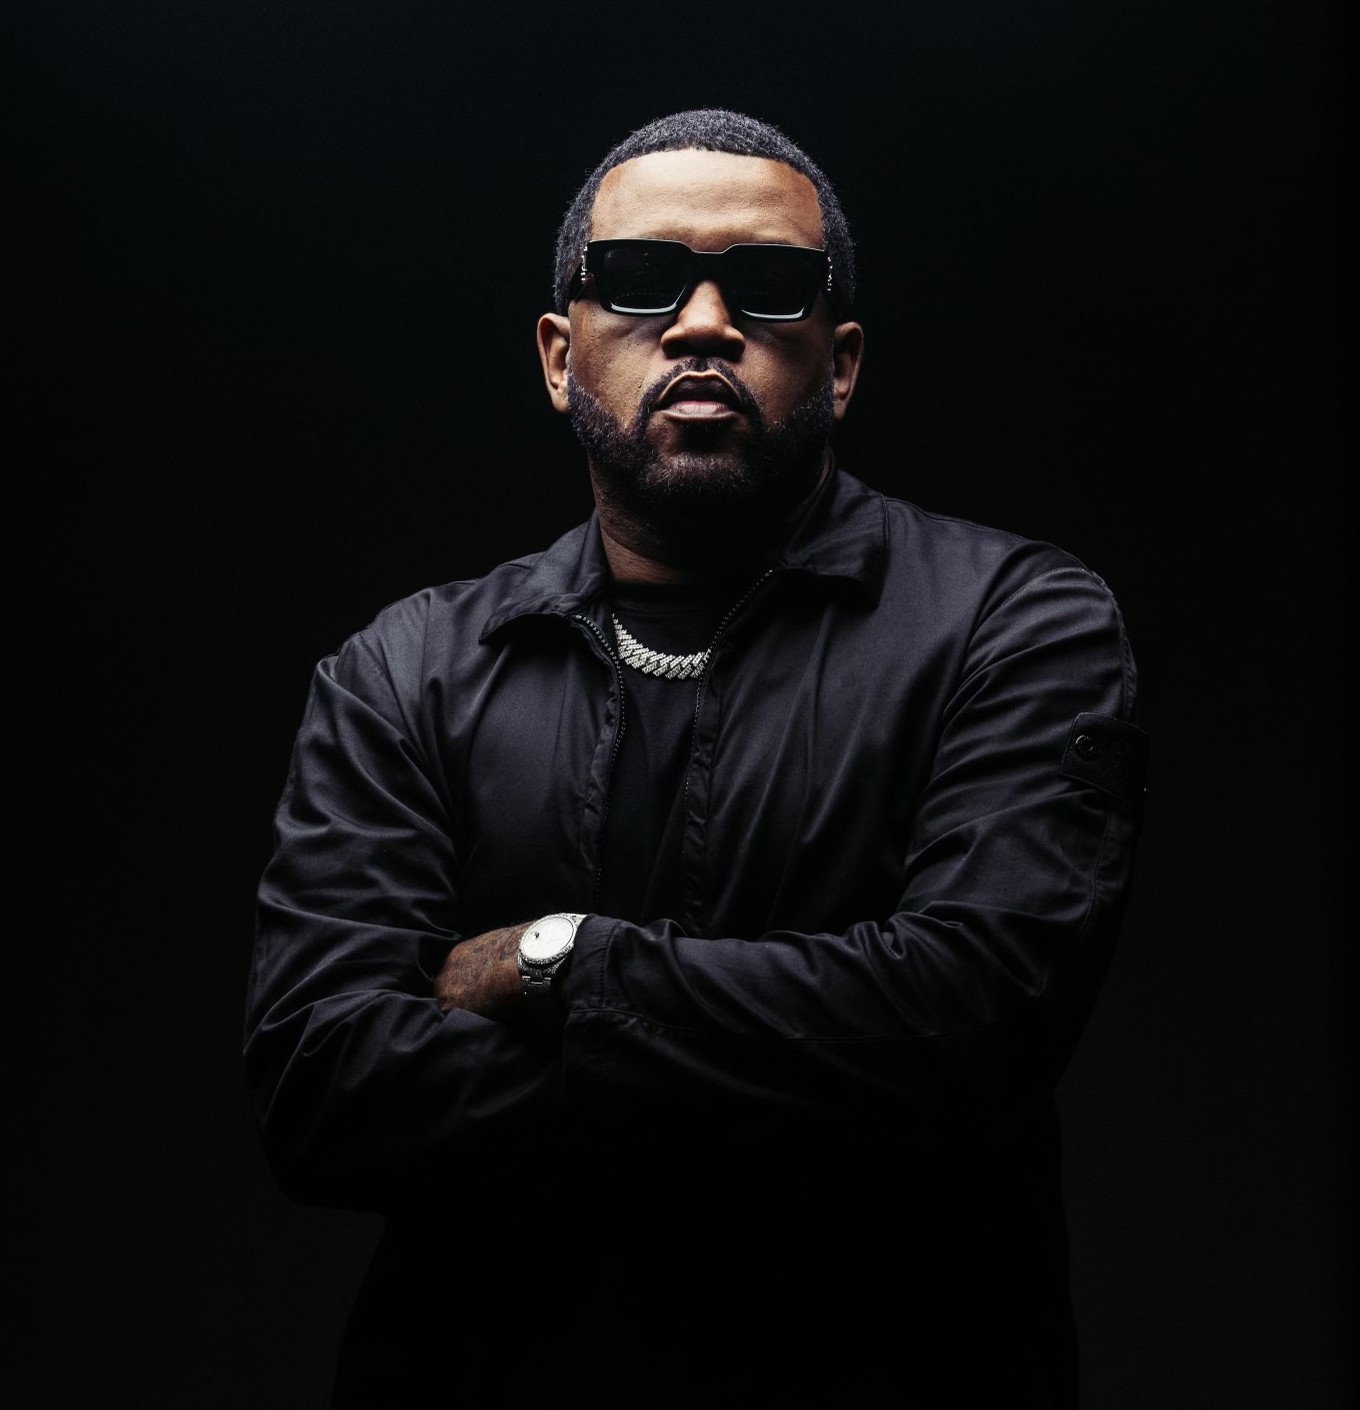 Lloyd Banks press photo by Anthony Geathers